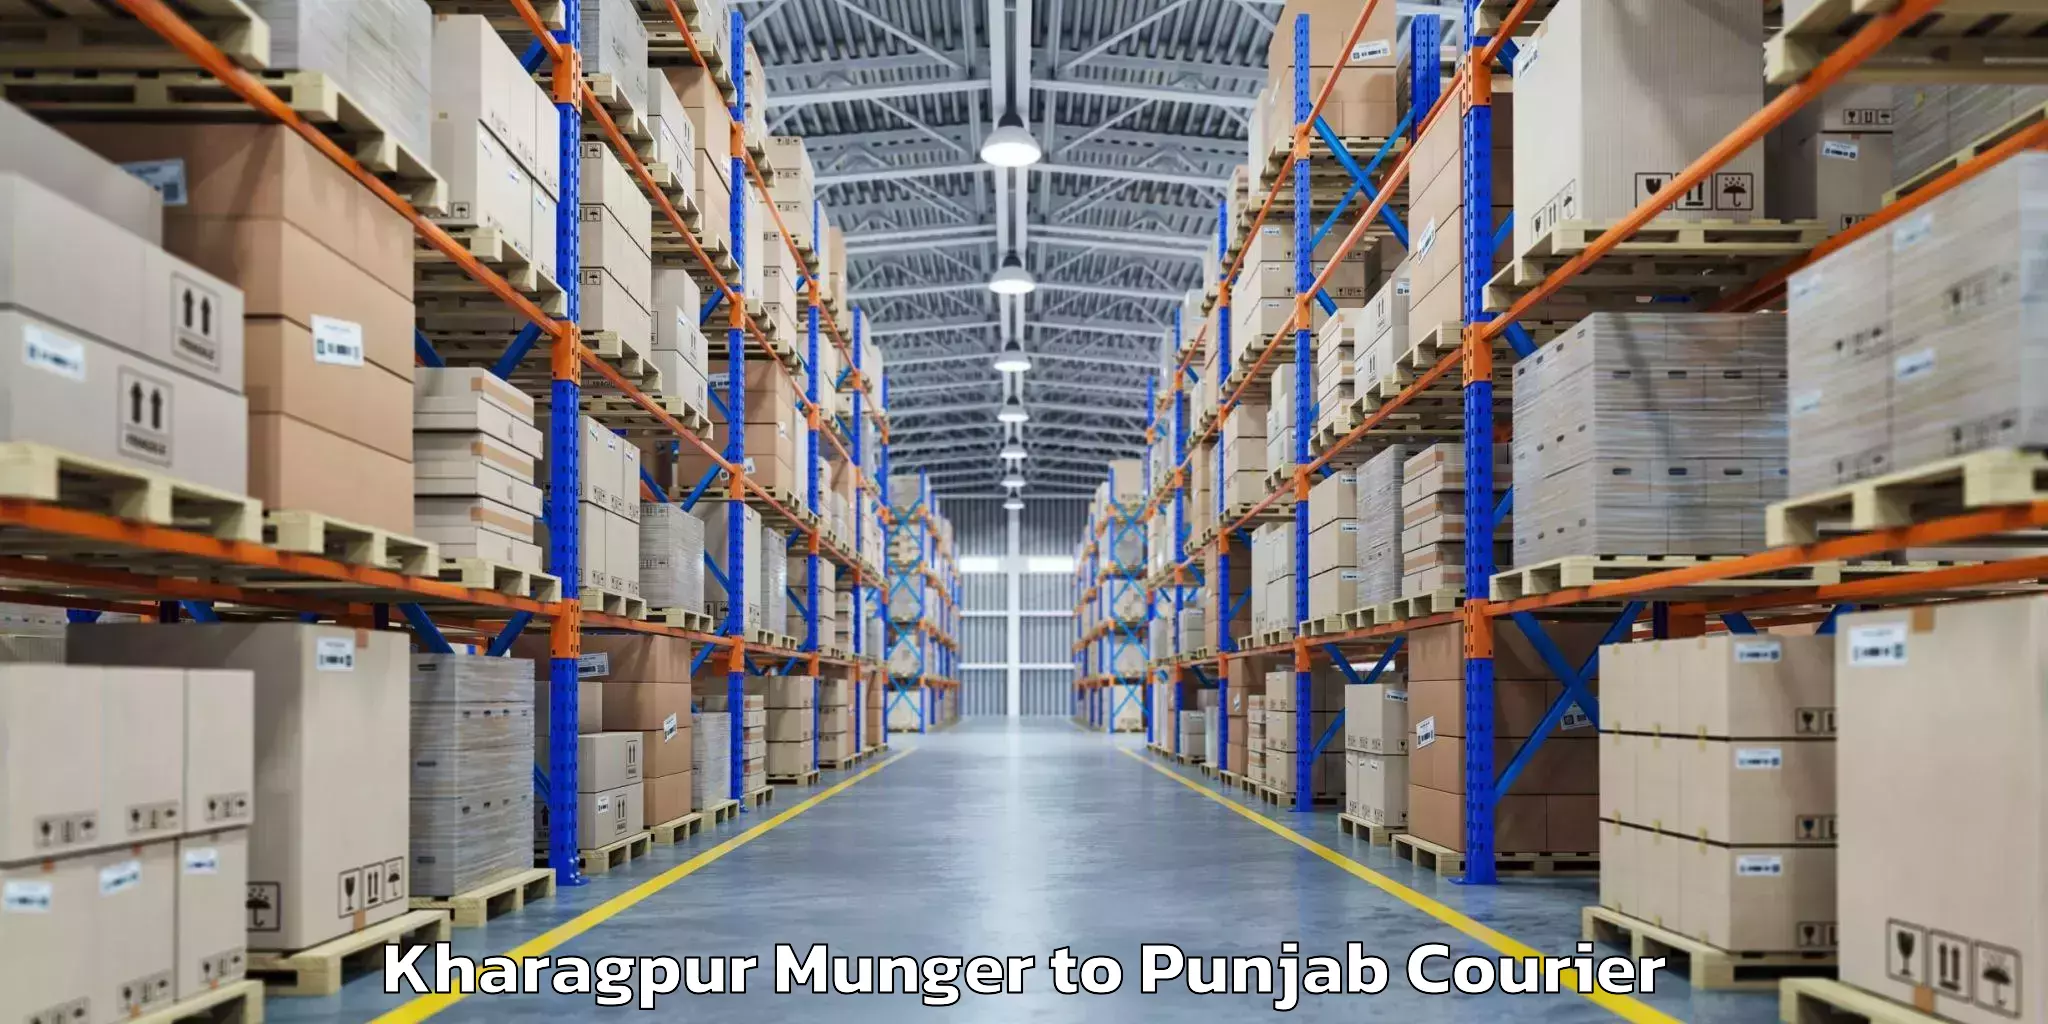 Baggage transport quote Kharagpur Munger to Sultanpur Lodhi